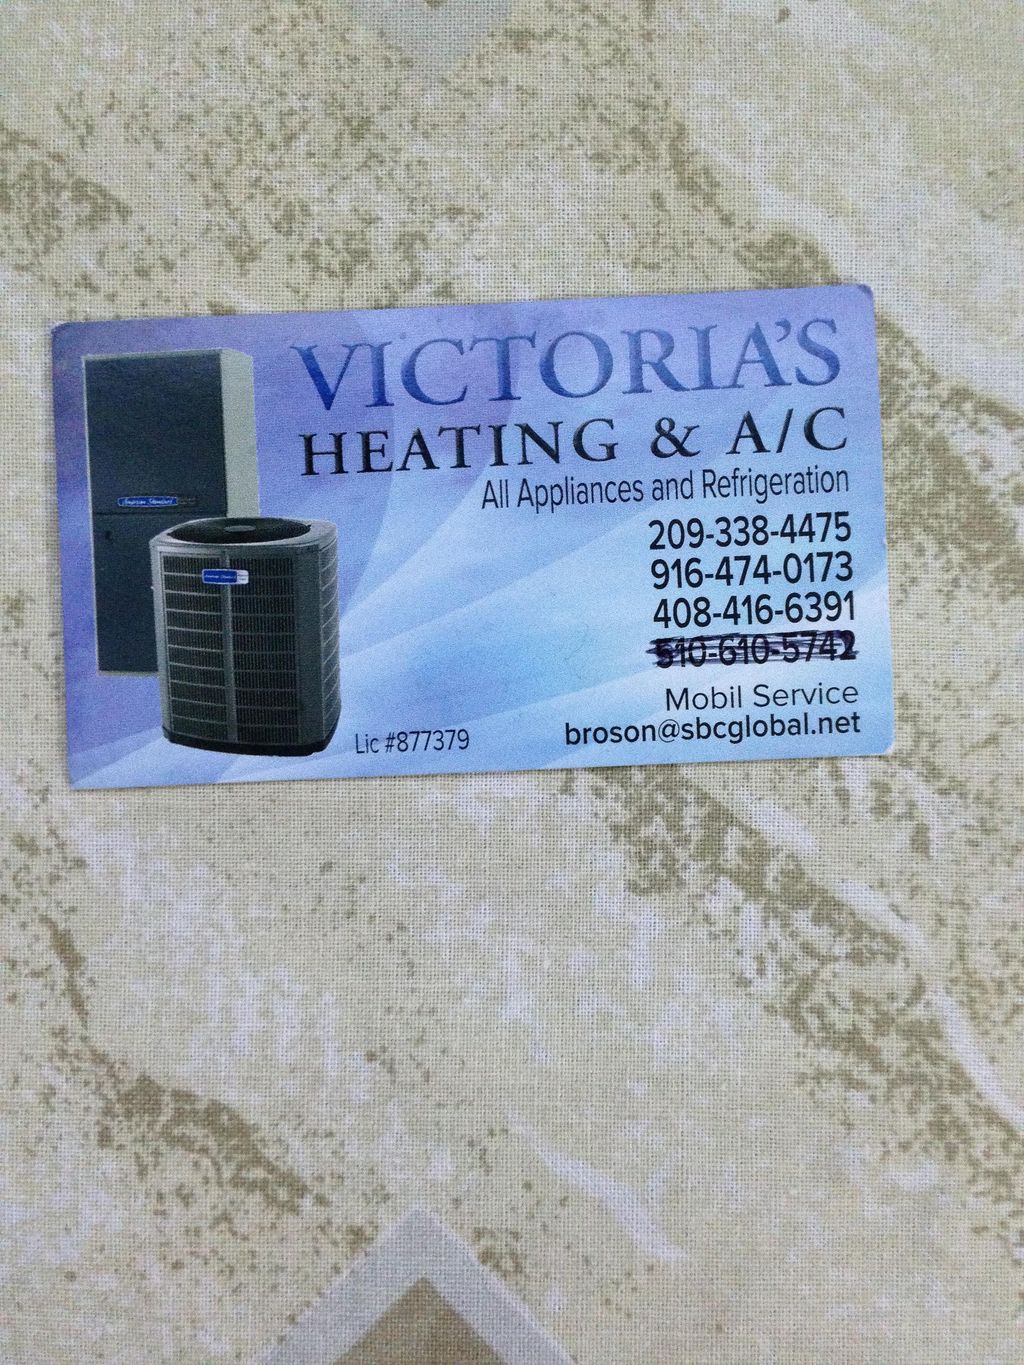 Victoria Heating & Airconditioning